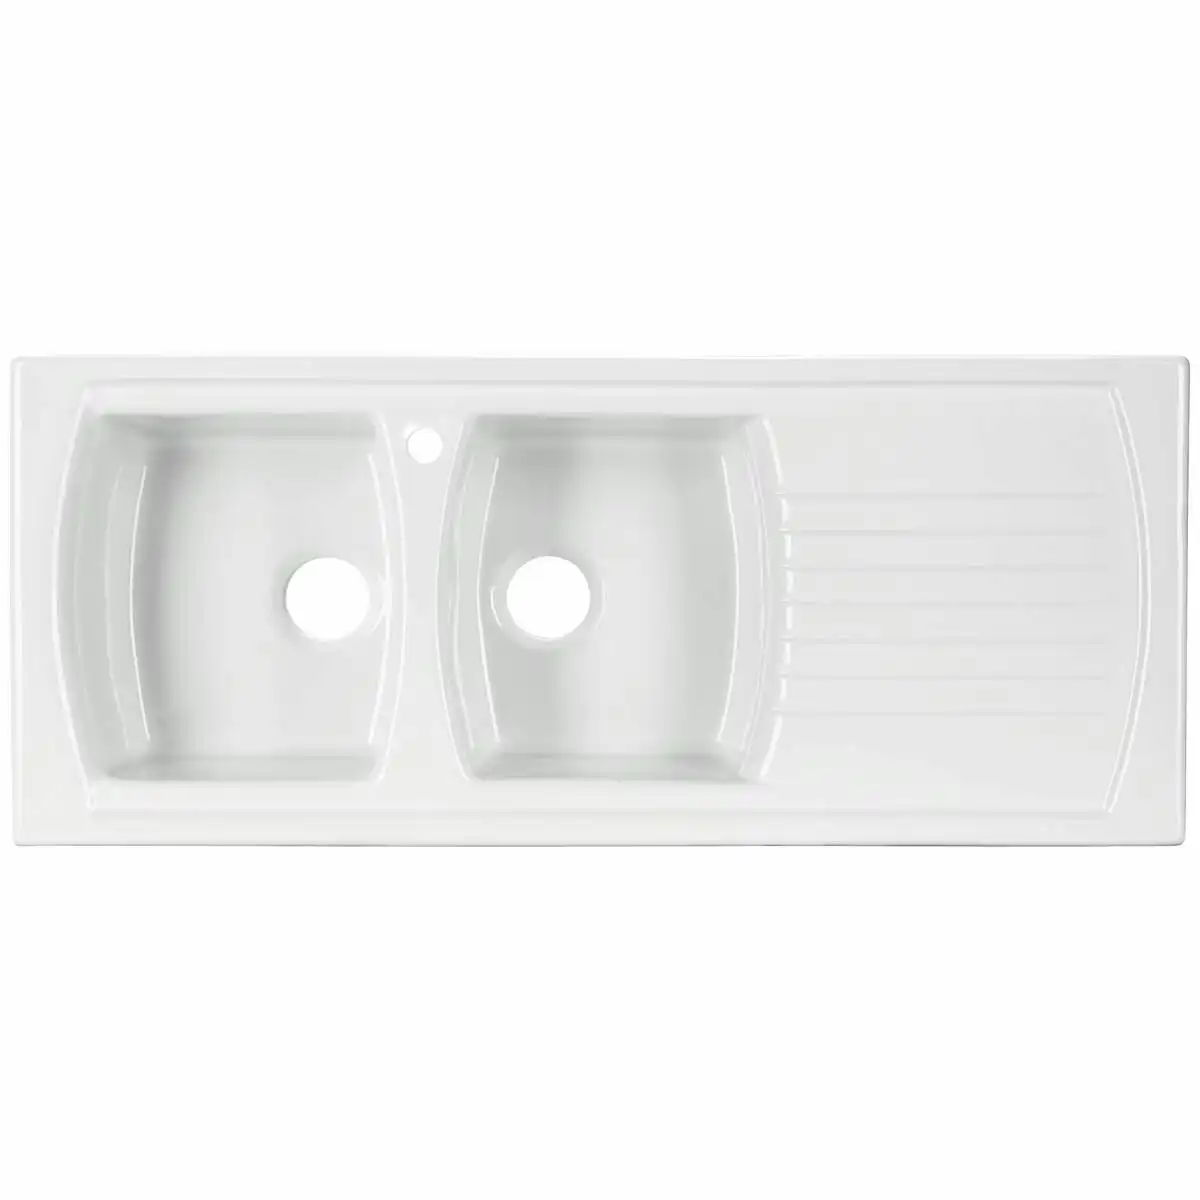 Turner Hastings Lusitano Double Bowl Sink with Right Drainer & Tap Hole